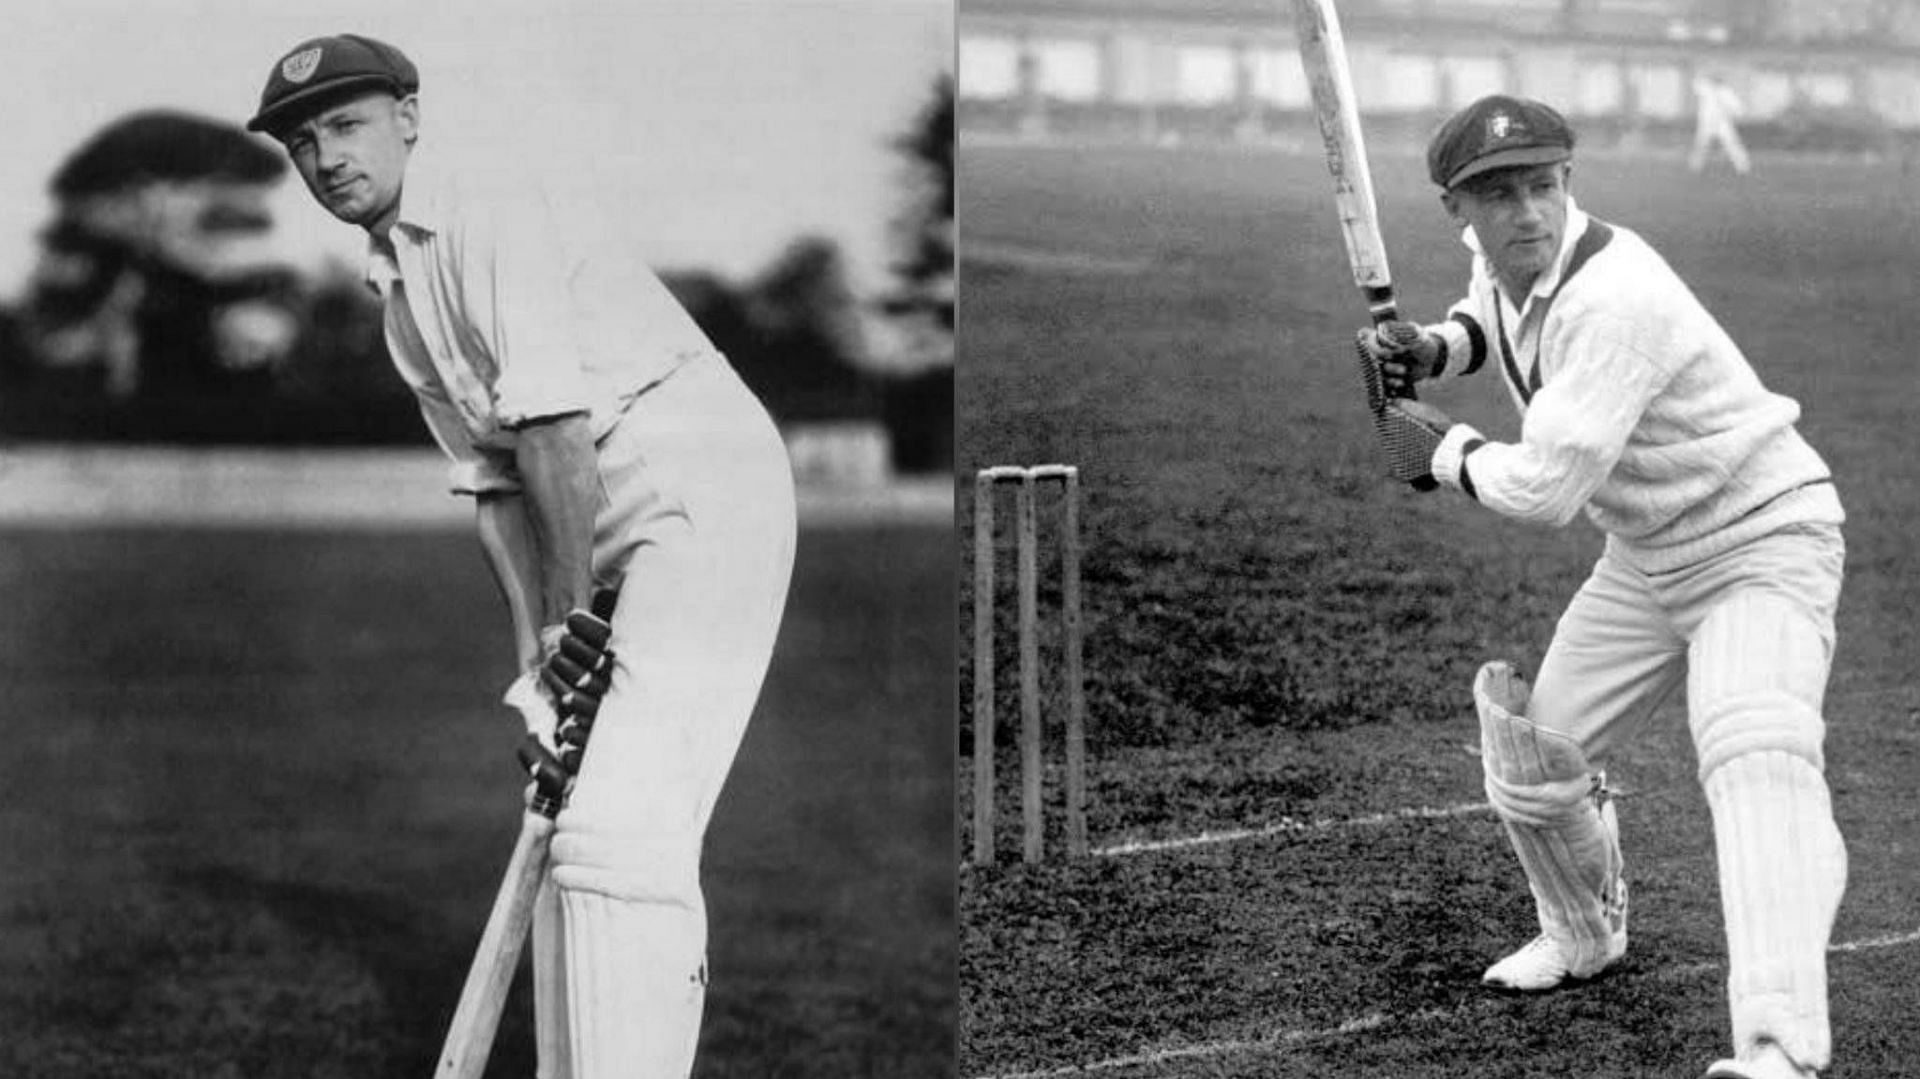 Sir Don Bradman owns many records in cricket